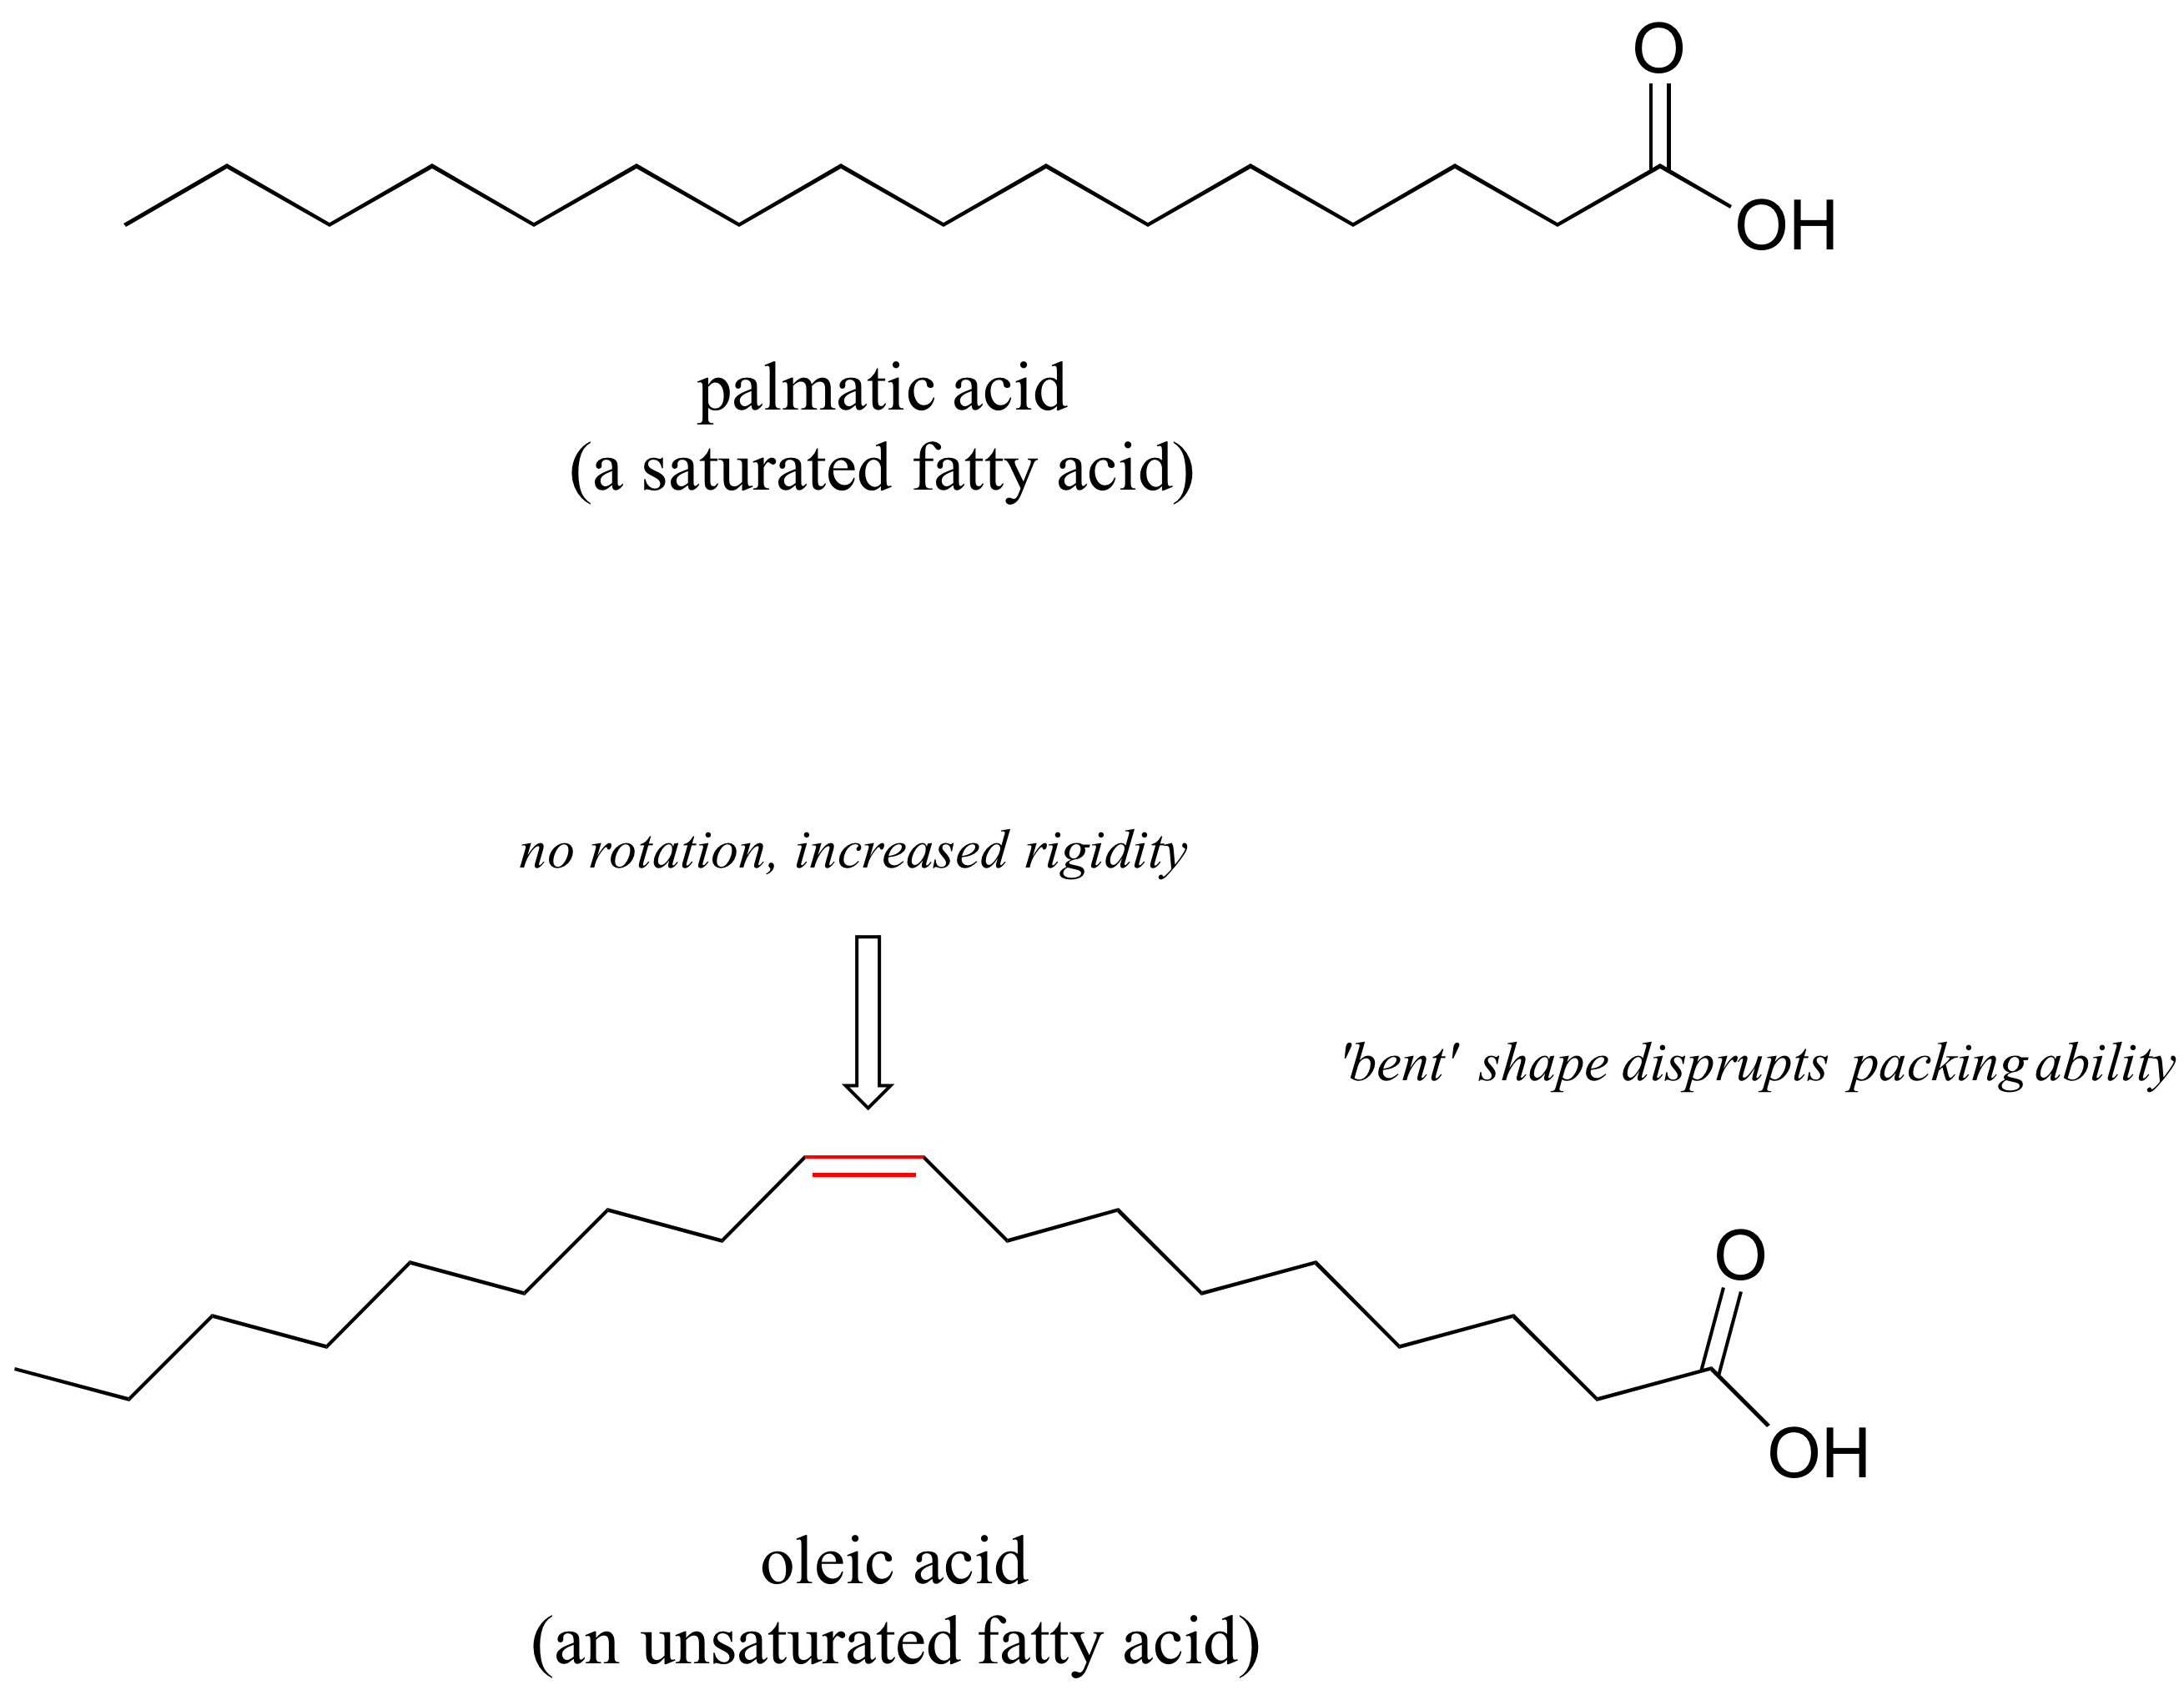 Bond line drawings of palmatic acid, a saturated fatty acid, and oleic acid, an unsaturated fatty acid. Oleic acid has a double bond in the carbon chain wich increased rigidity and prevents rotation. It also give oleic acid a bent shape which disrupts packing ability. 